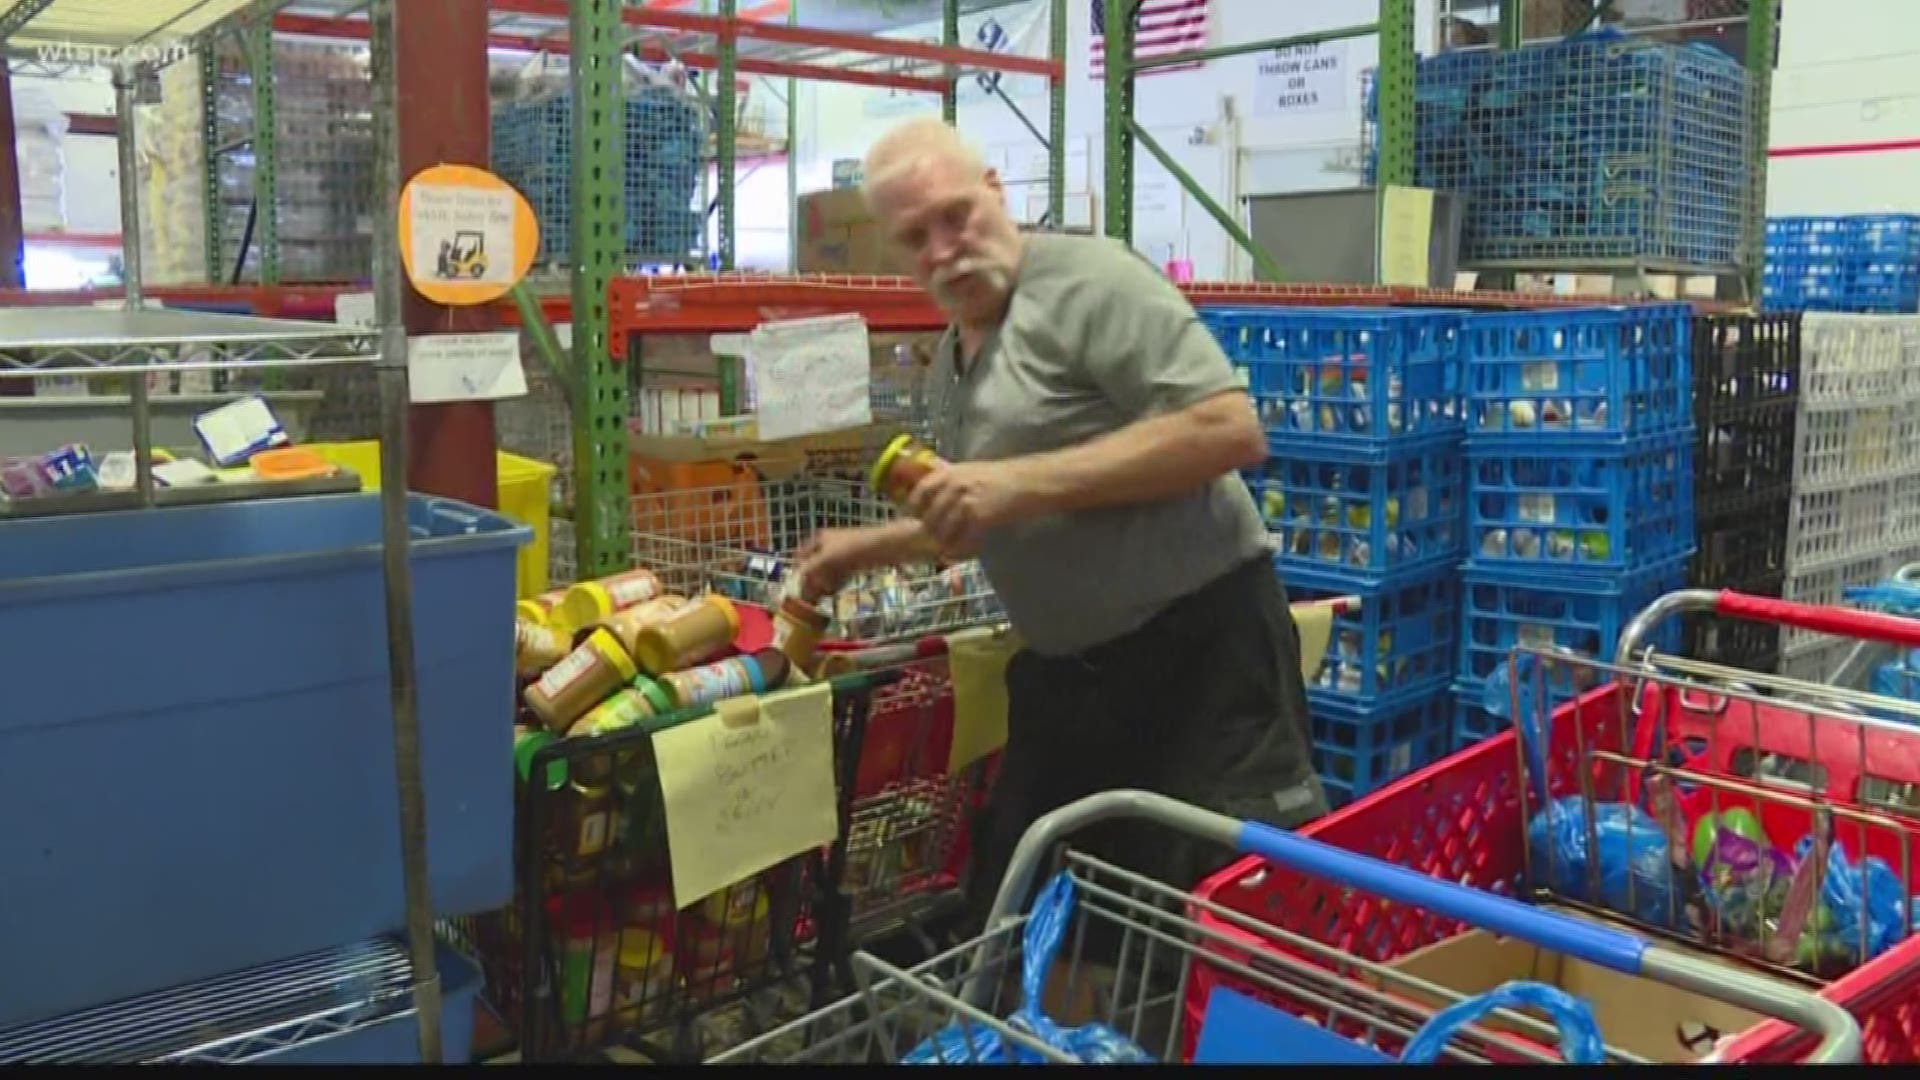 We are feeling the impacts of that economic crisis here in Tampa Bay where food banks tell Liz Burch they've never seen a need like this before.